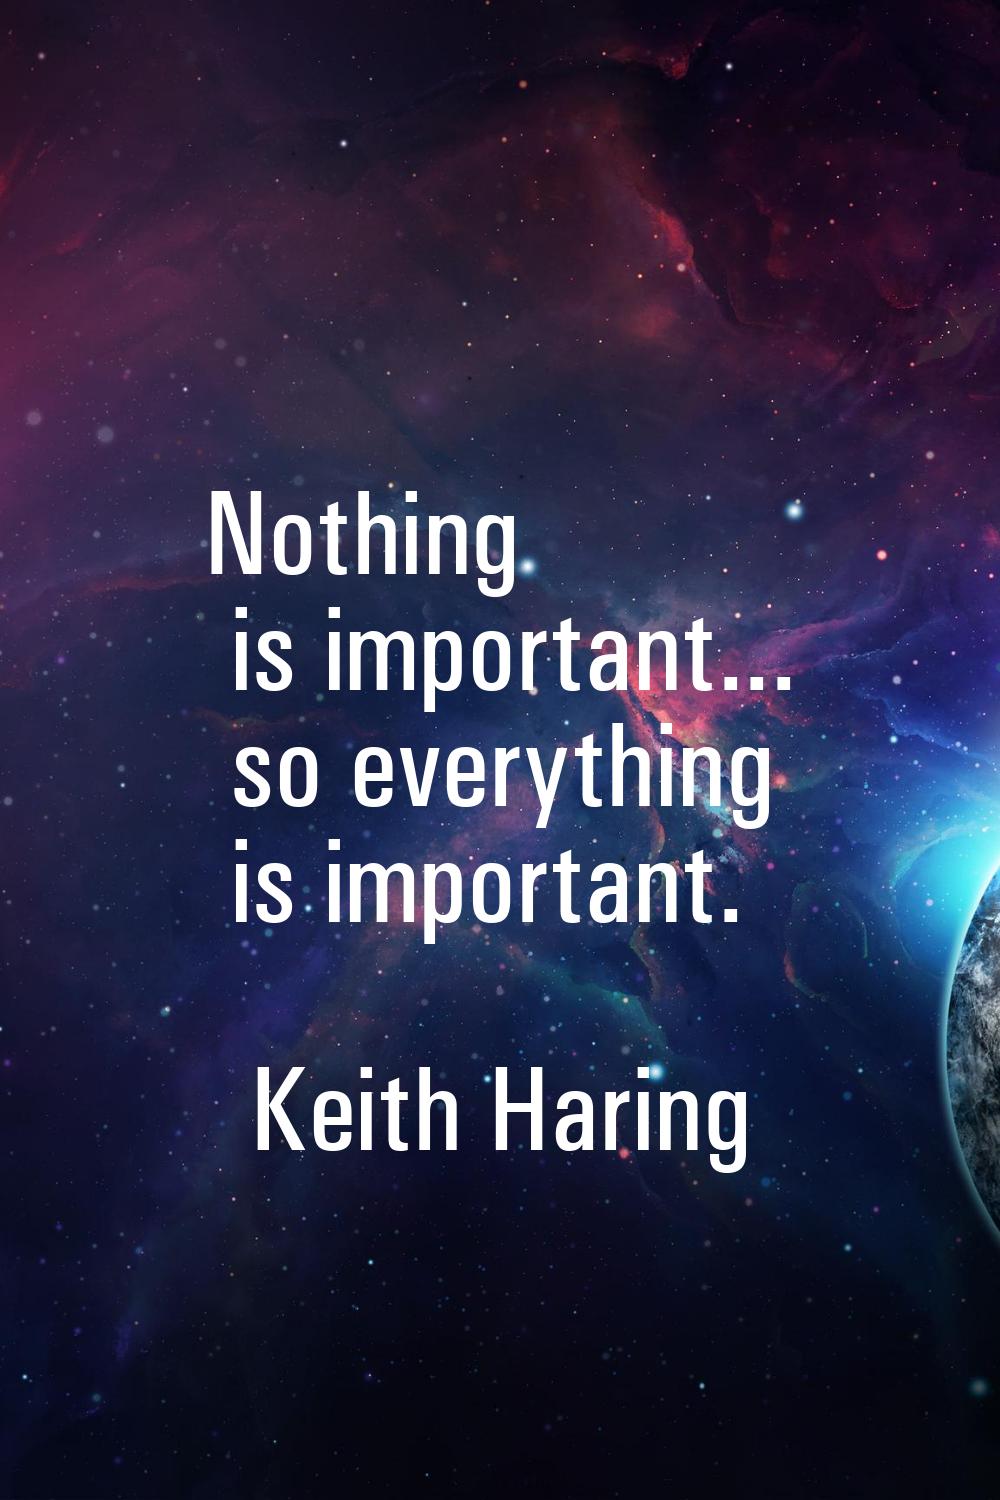 Nothing is important... so everything is important.